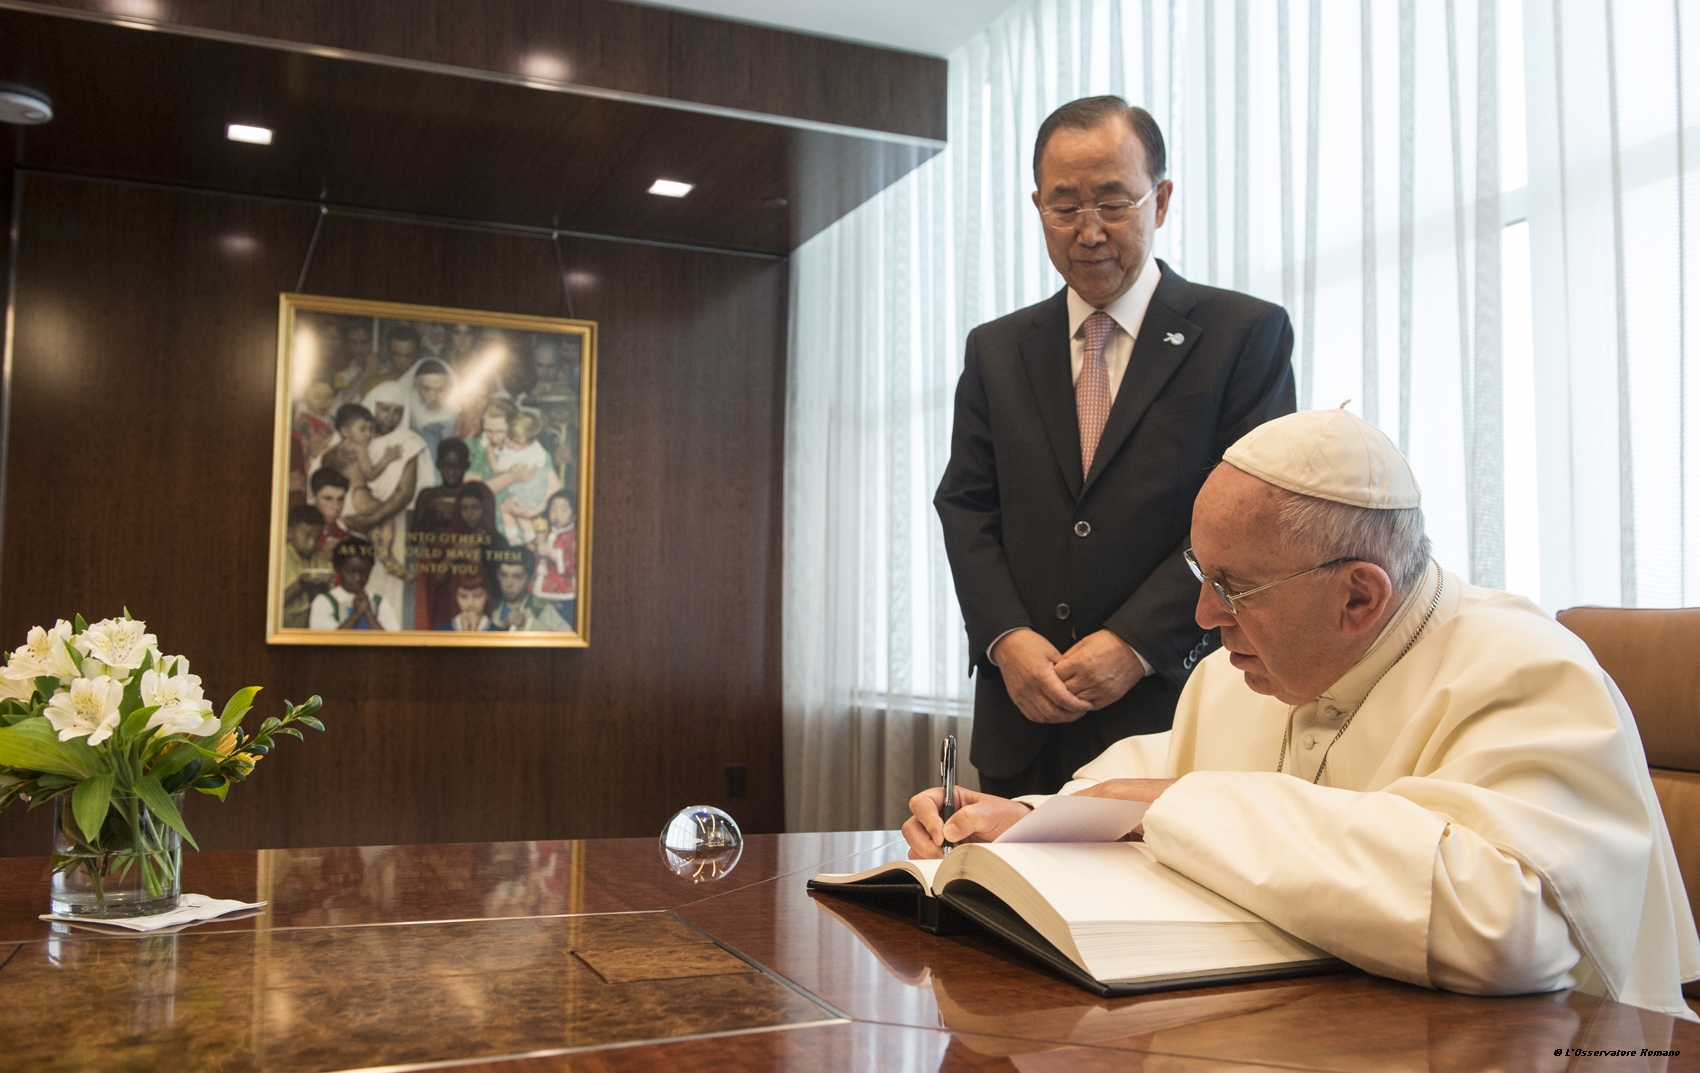 Pope Francis signs the Golden Book at the Headquarters of the UN in New York